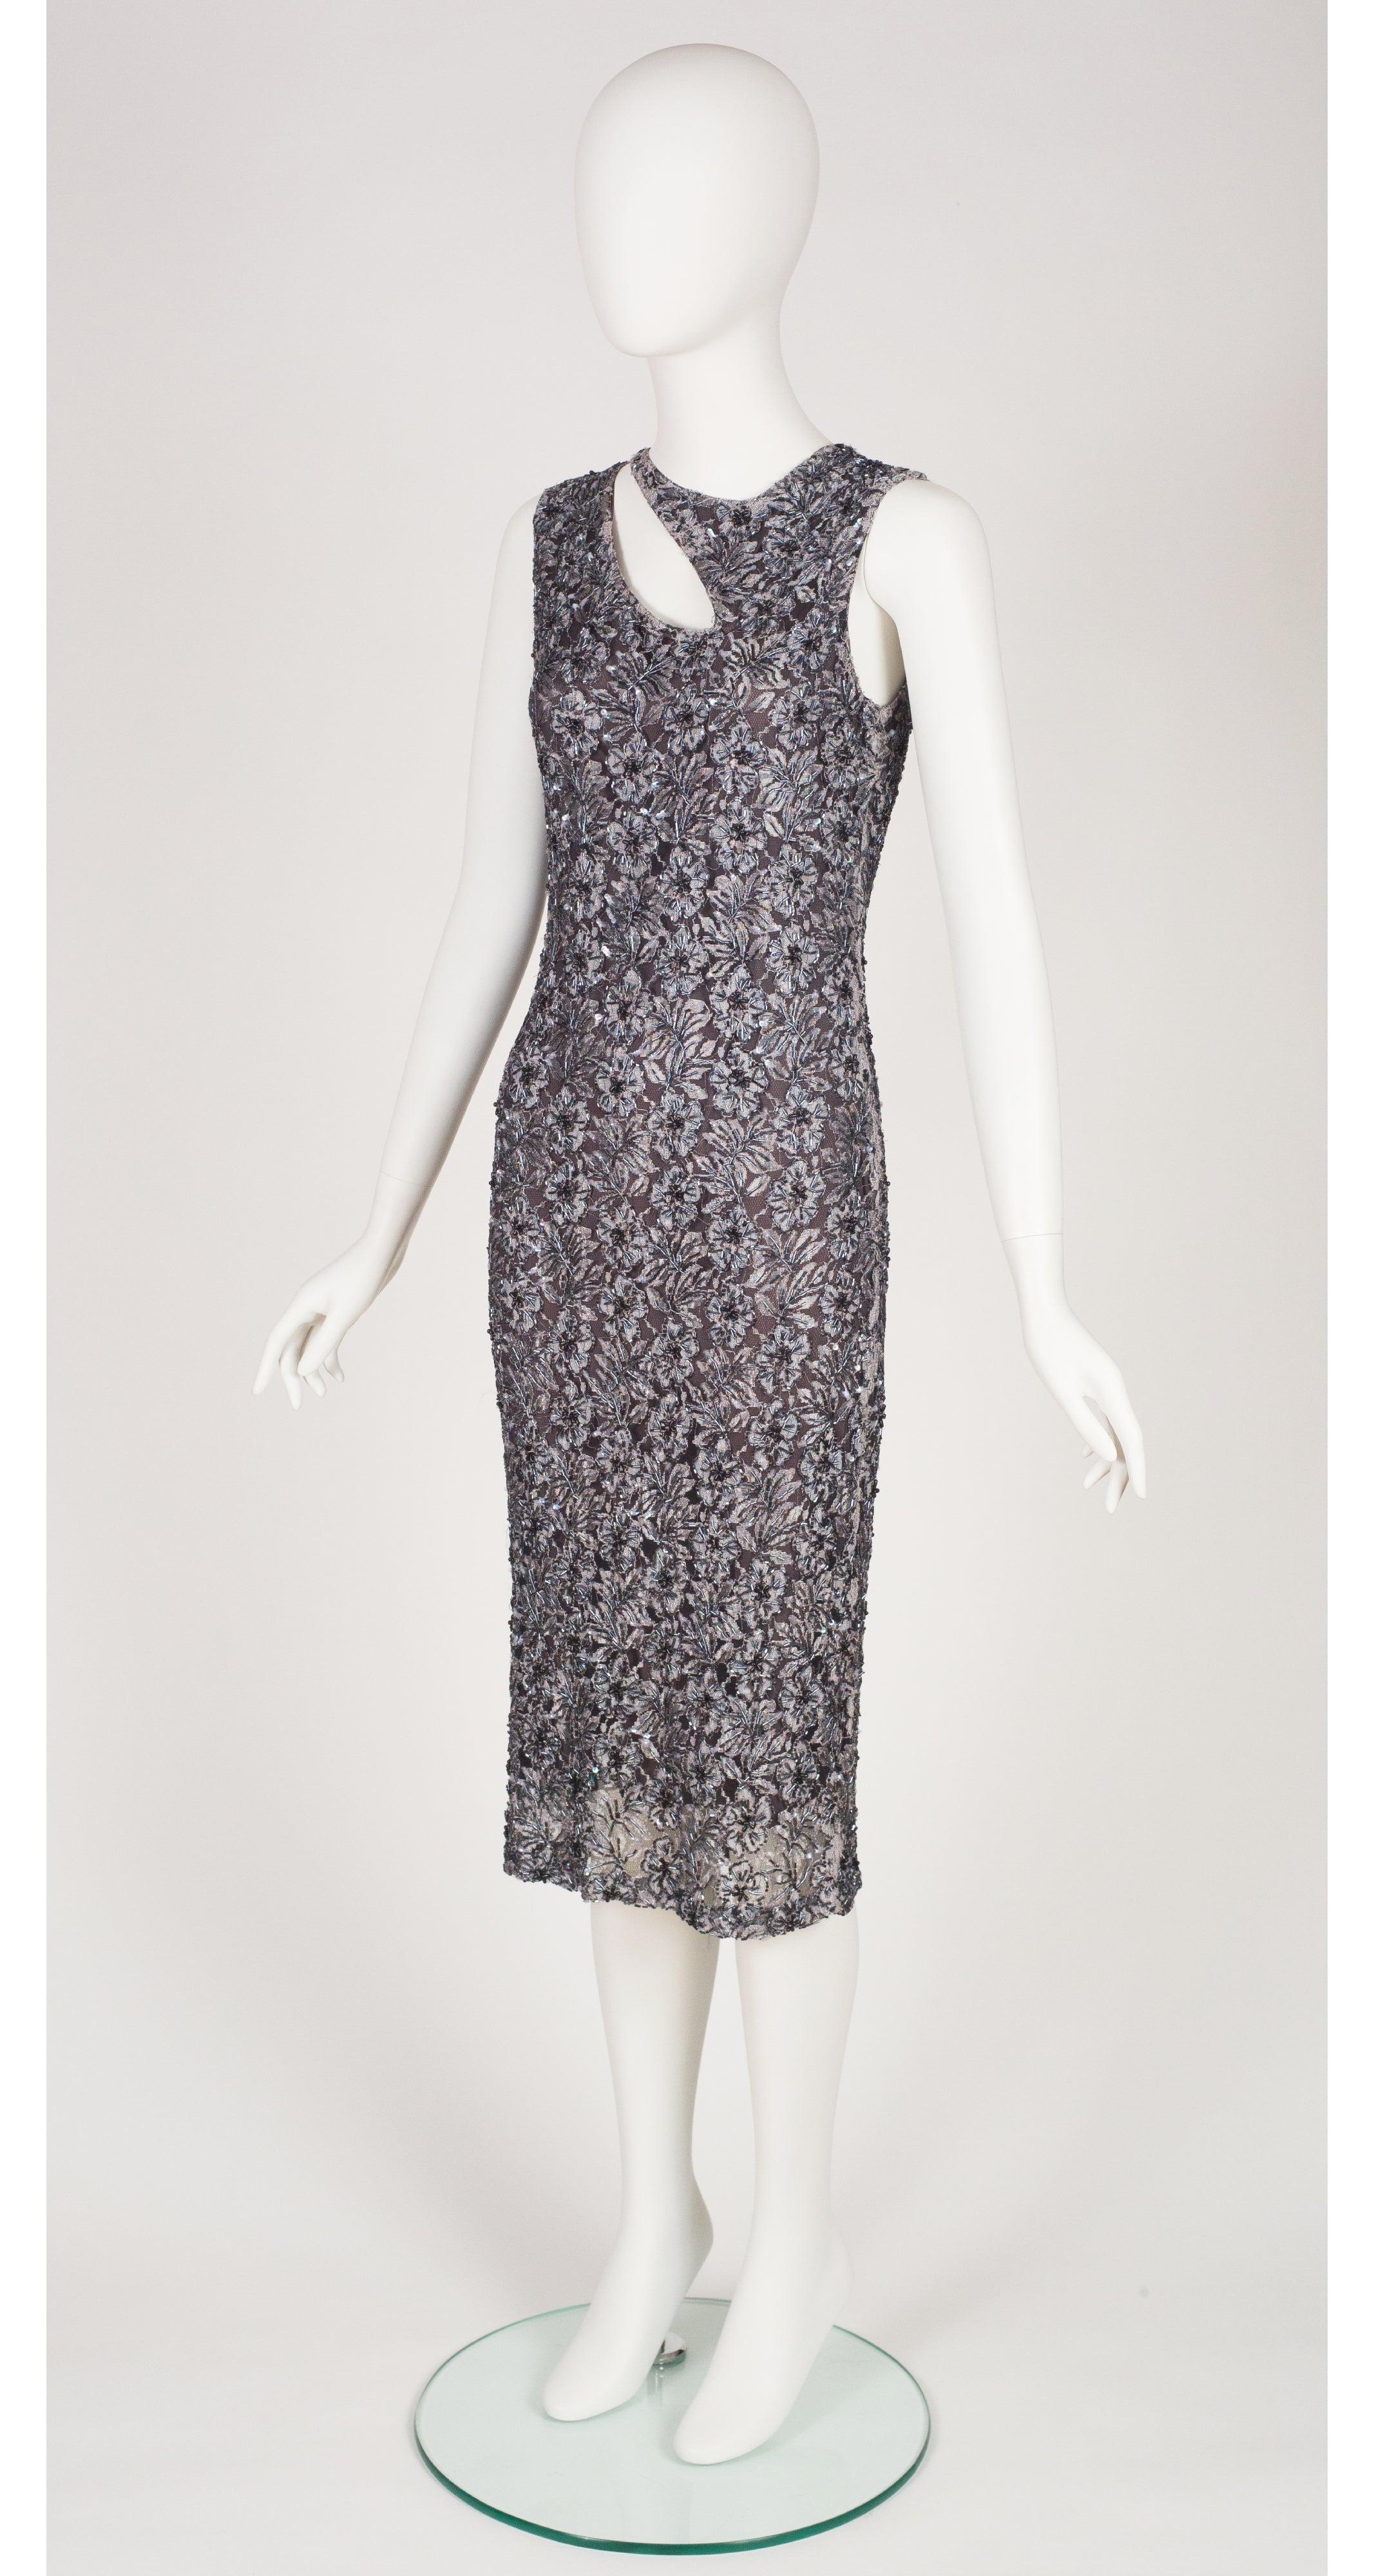 1990s Cut-Out Beaded Gray Floral Lace Evening Dress